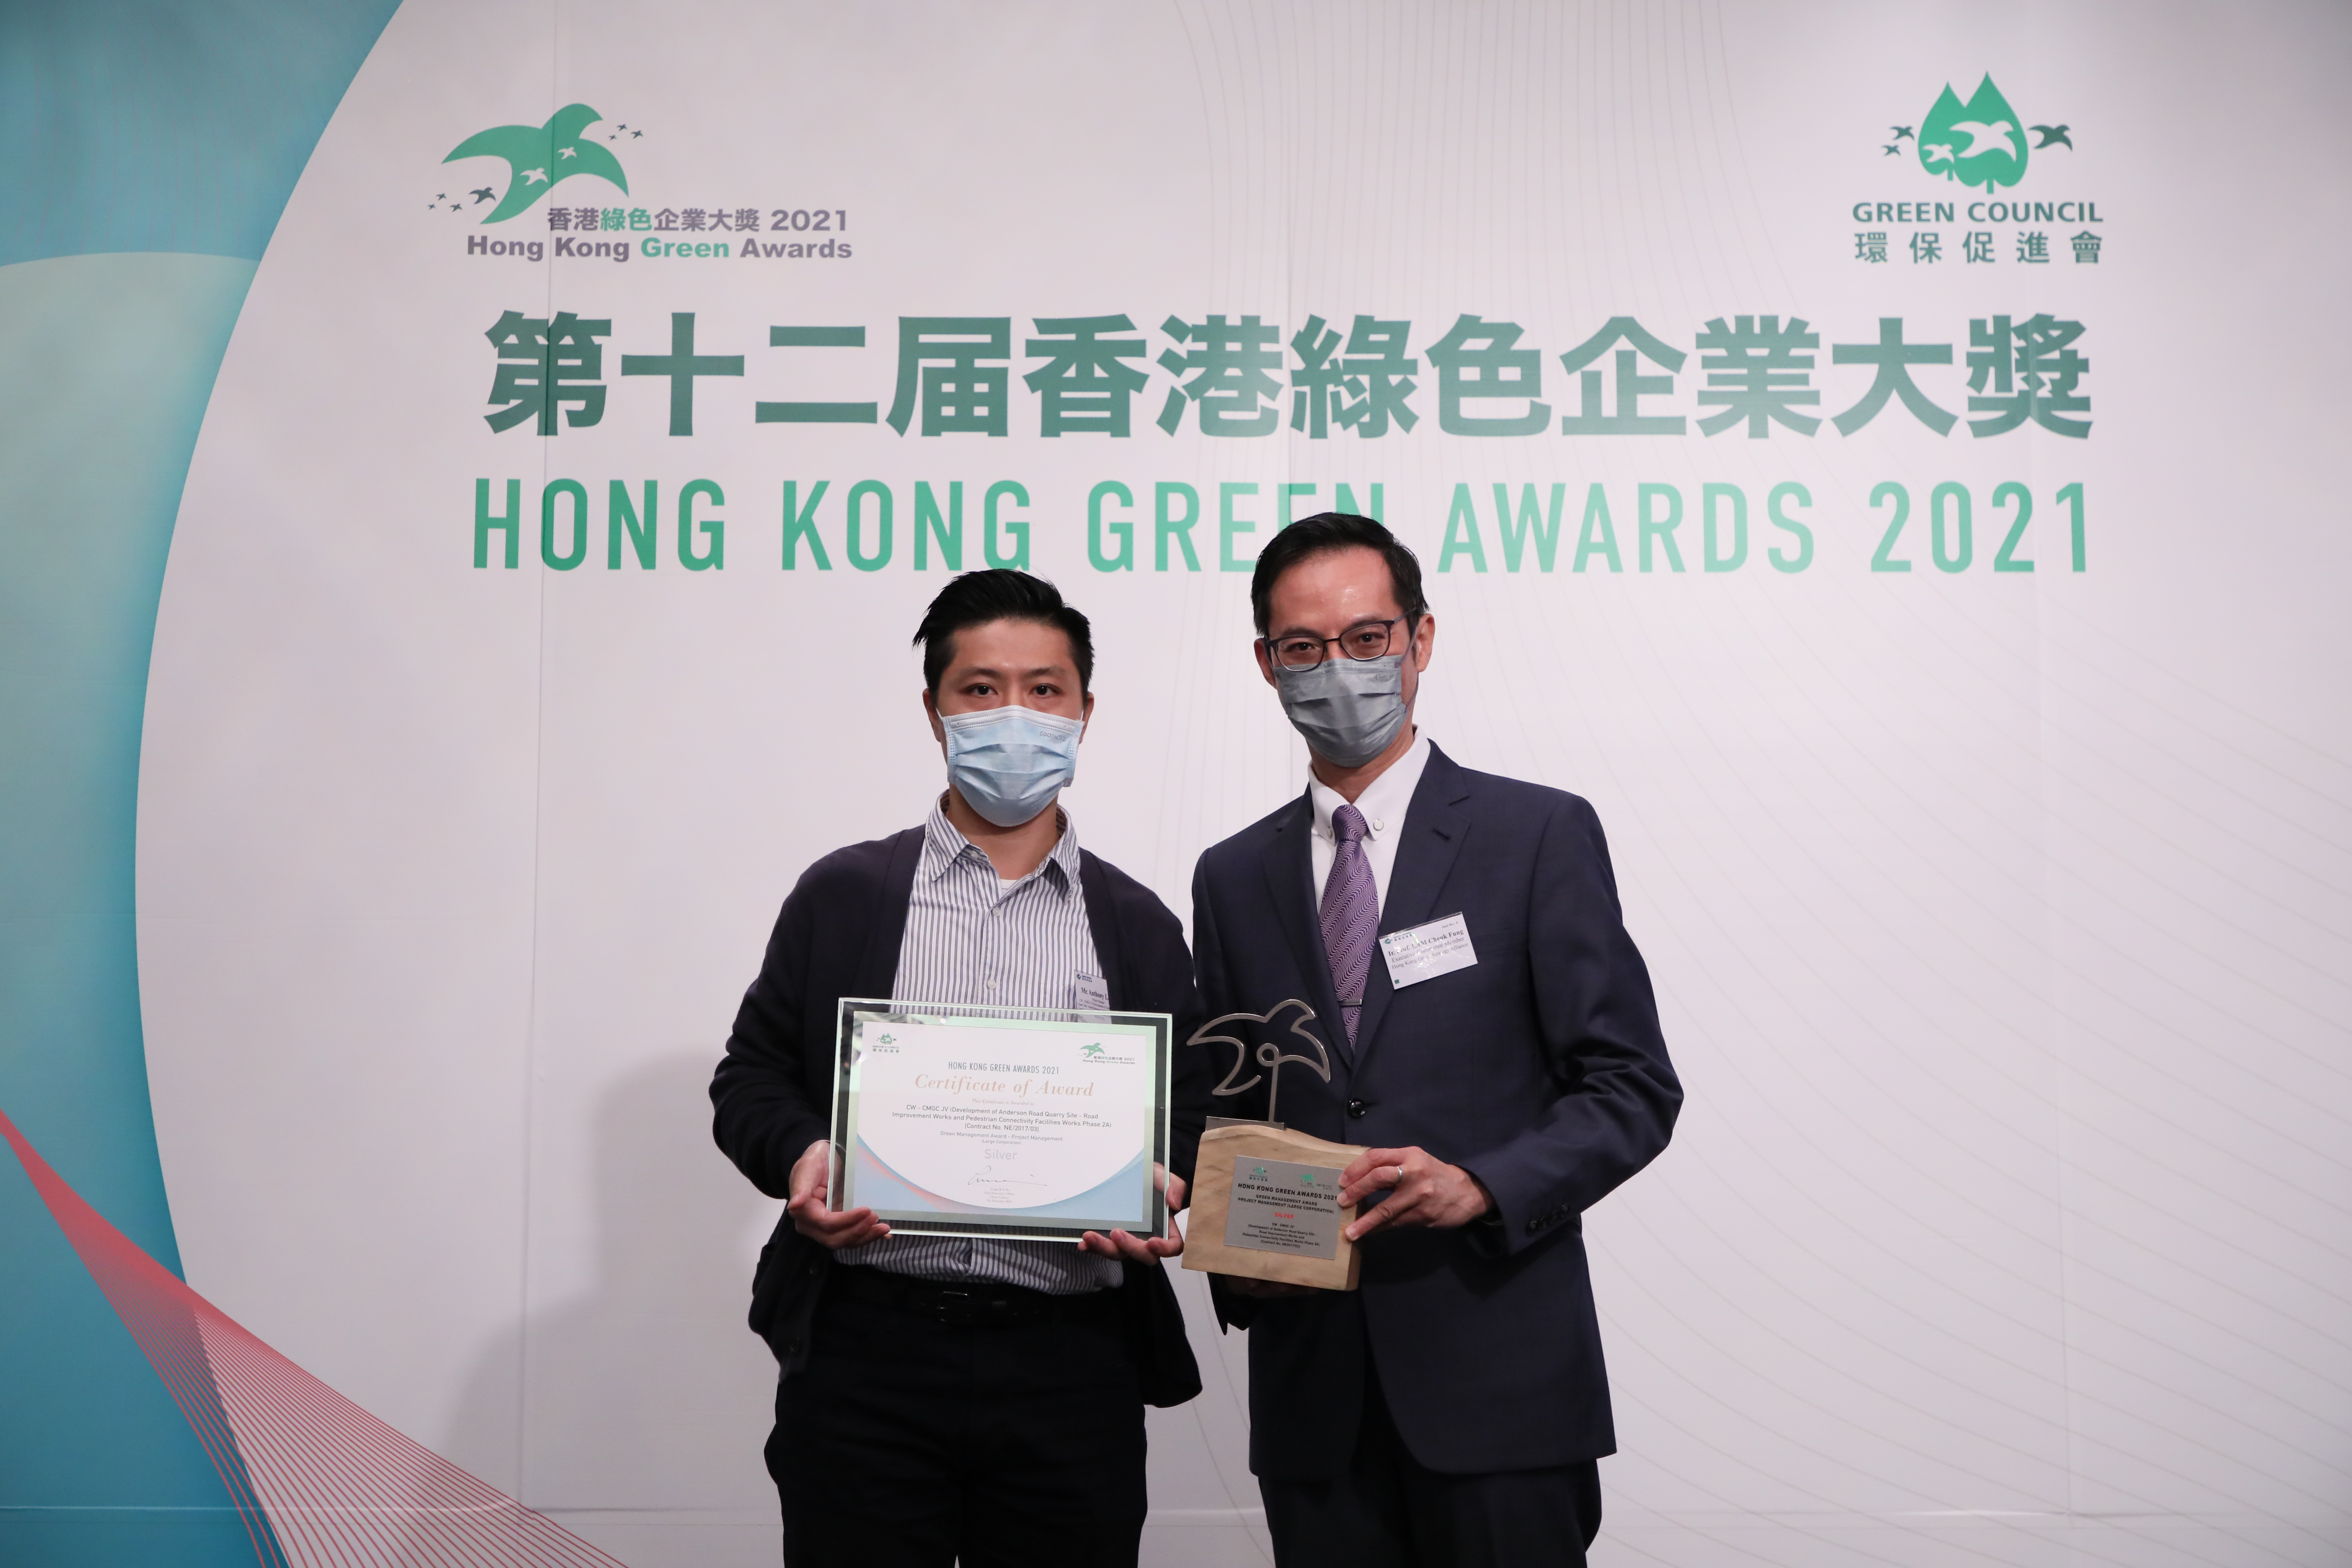 CW-CMGC JV has obtained a Silver Award from Green Management Award Project Management (Large Corporation) organised by Hong Kong Green Awards 2021.